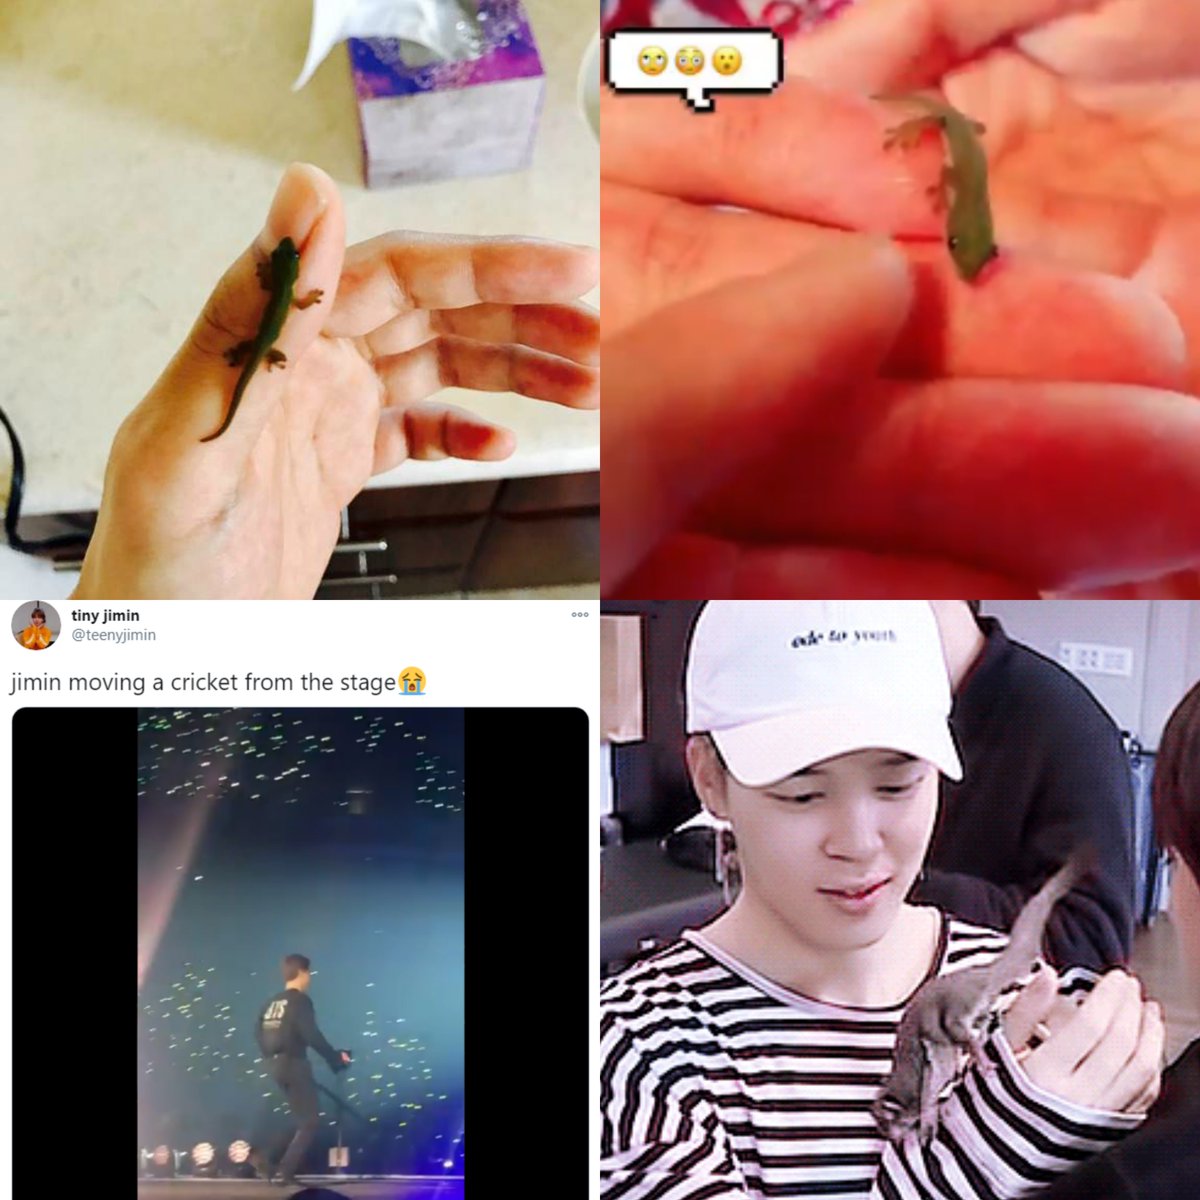  #jimtober D4: Jimin has a heart of gold, even when it comes to caring about small animals or insects. He carried a hurt grasshopper out of the set, felt bad seeing a bird with no foot, fed birds his ice cream, and posted tweets calling a tiny gecko a "baby" among other things